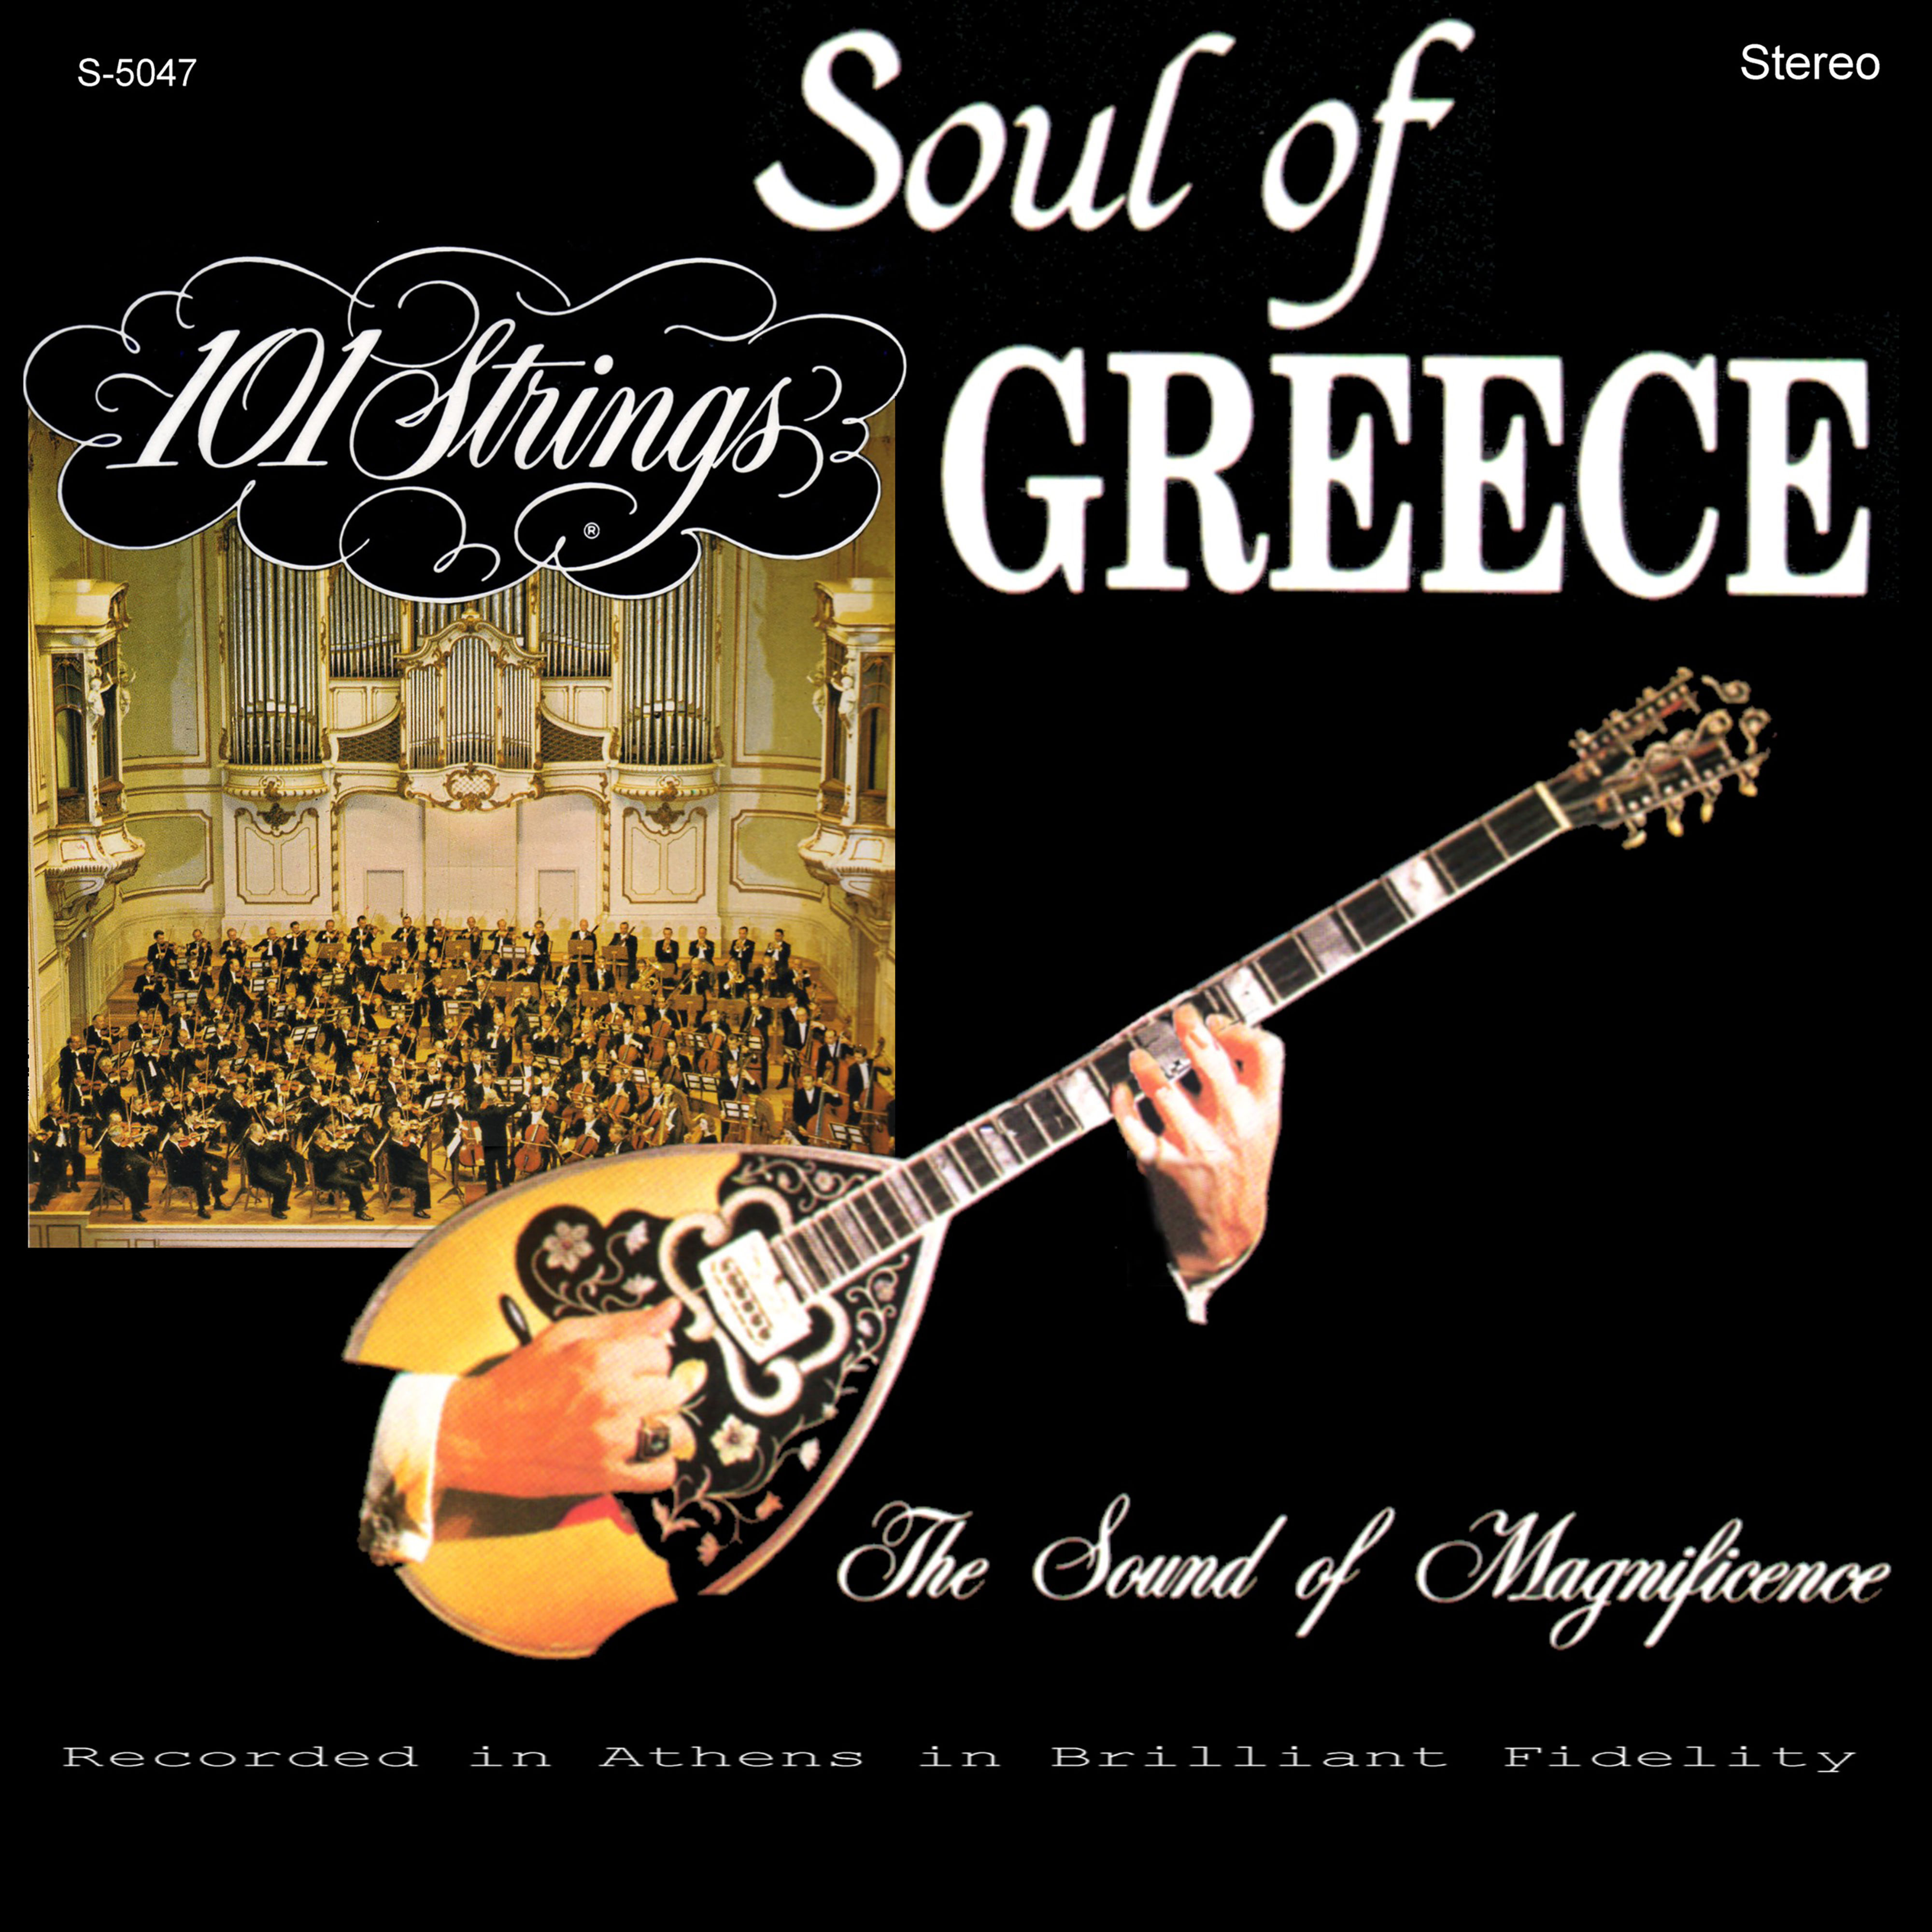 101 Strings Orchestra - The Soul of Greece (1966/2019) [FLAC 24bit/96kHz]